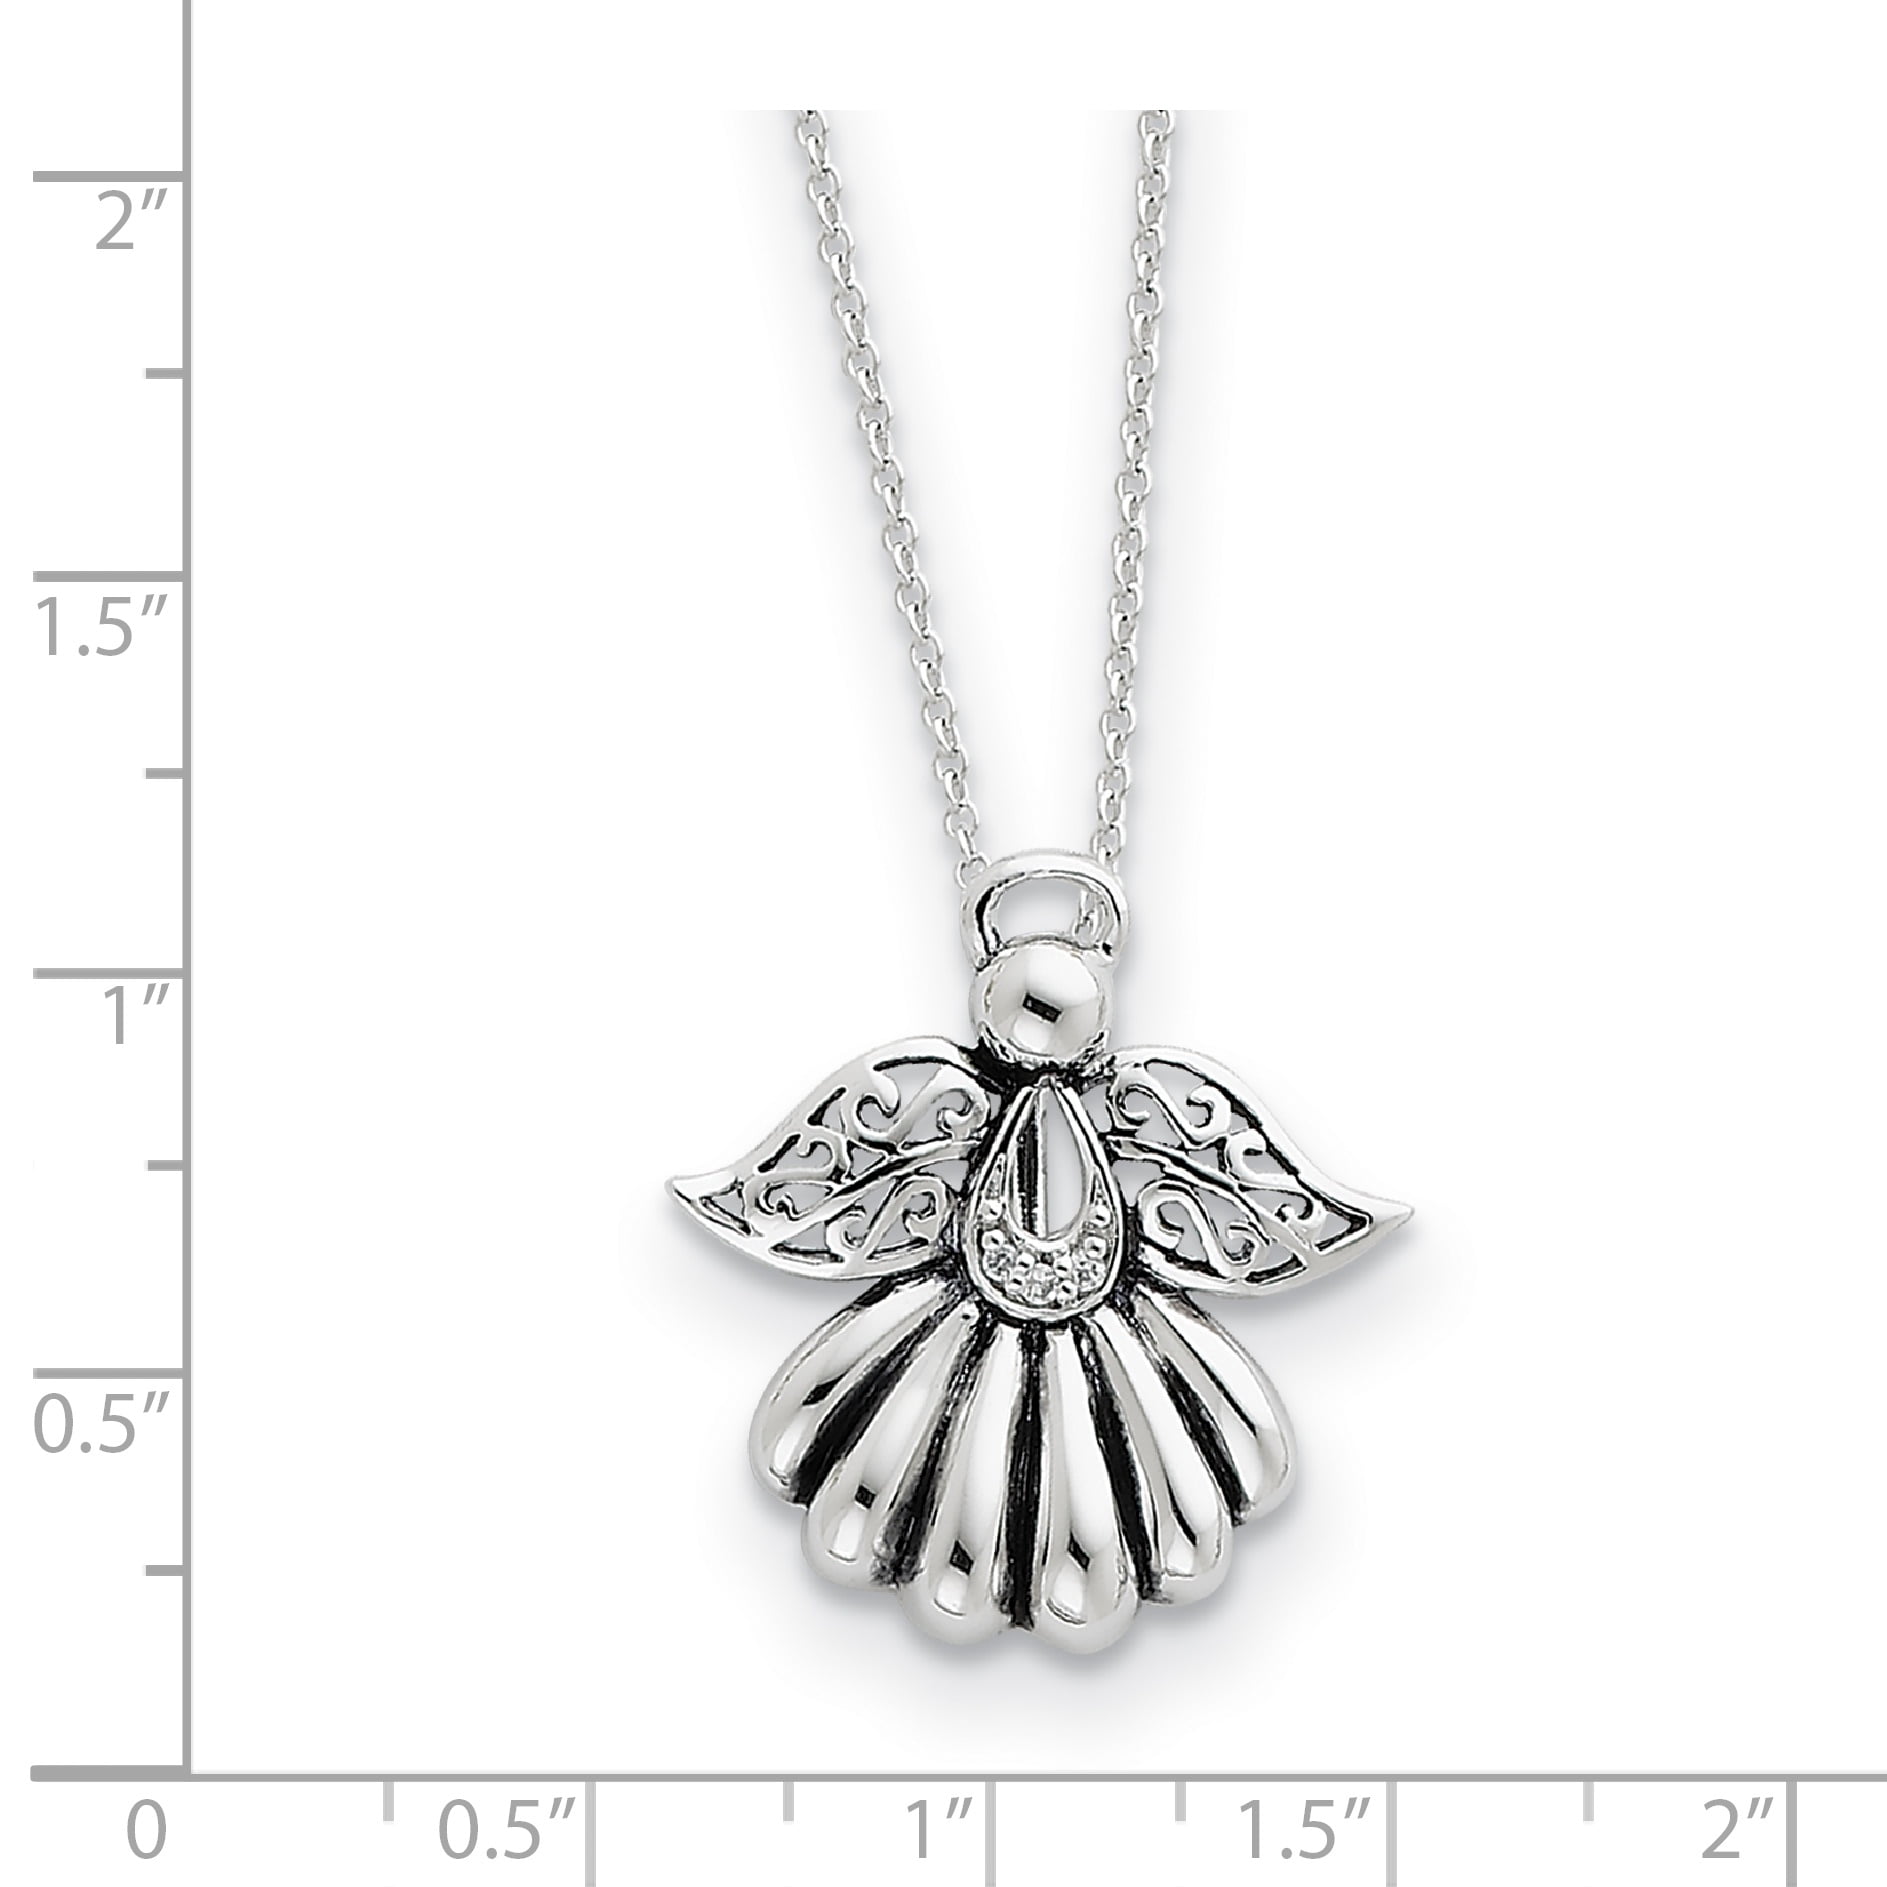 925 Sterling Silver Cubic Zirconia Cz Angel Of Friendship 18 Inch Chain Necklace Pendant Charm Religious Inspirational Fine Jewelry Gifts For Women For Her